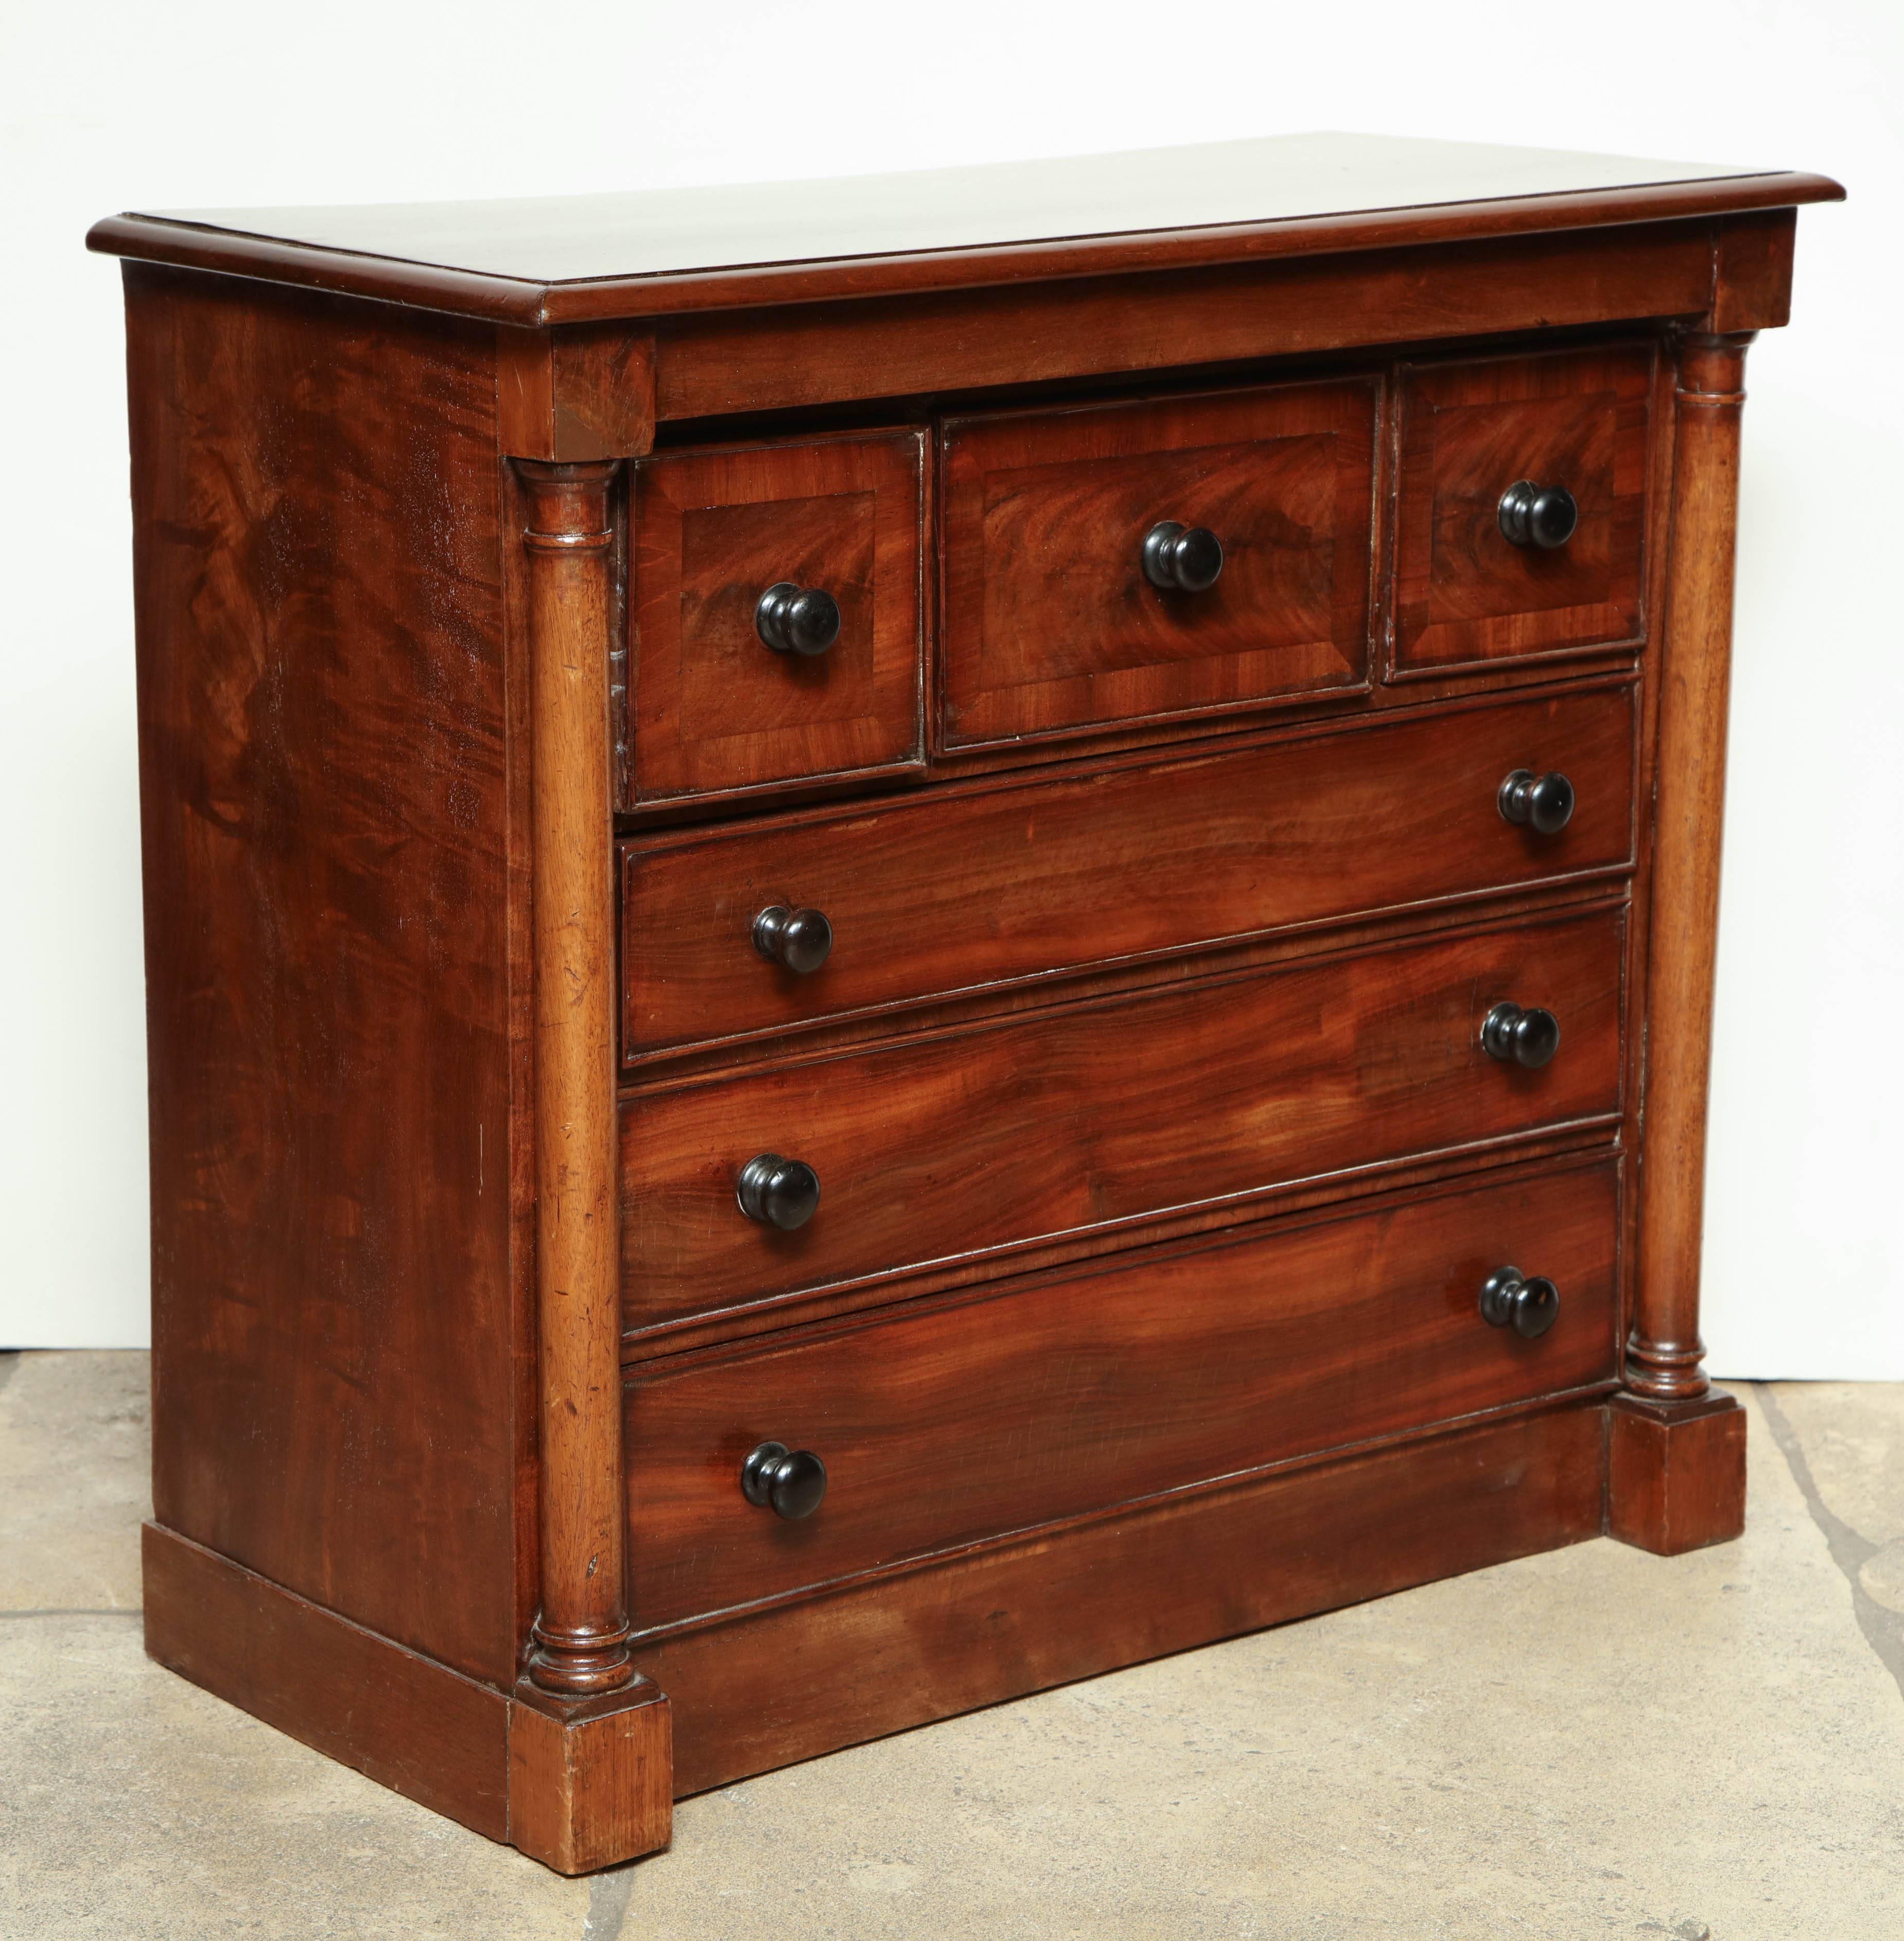 A fine English William IV mahogany miniature chest of drawers.